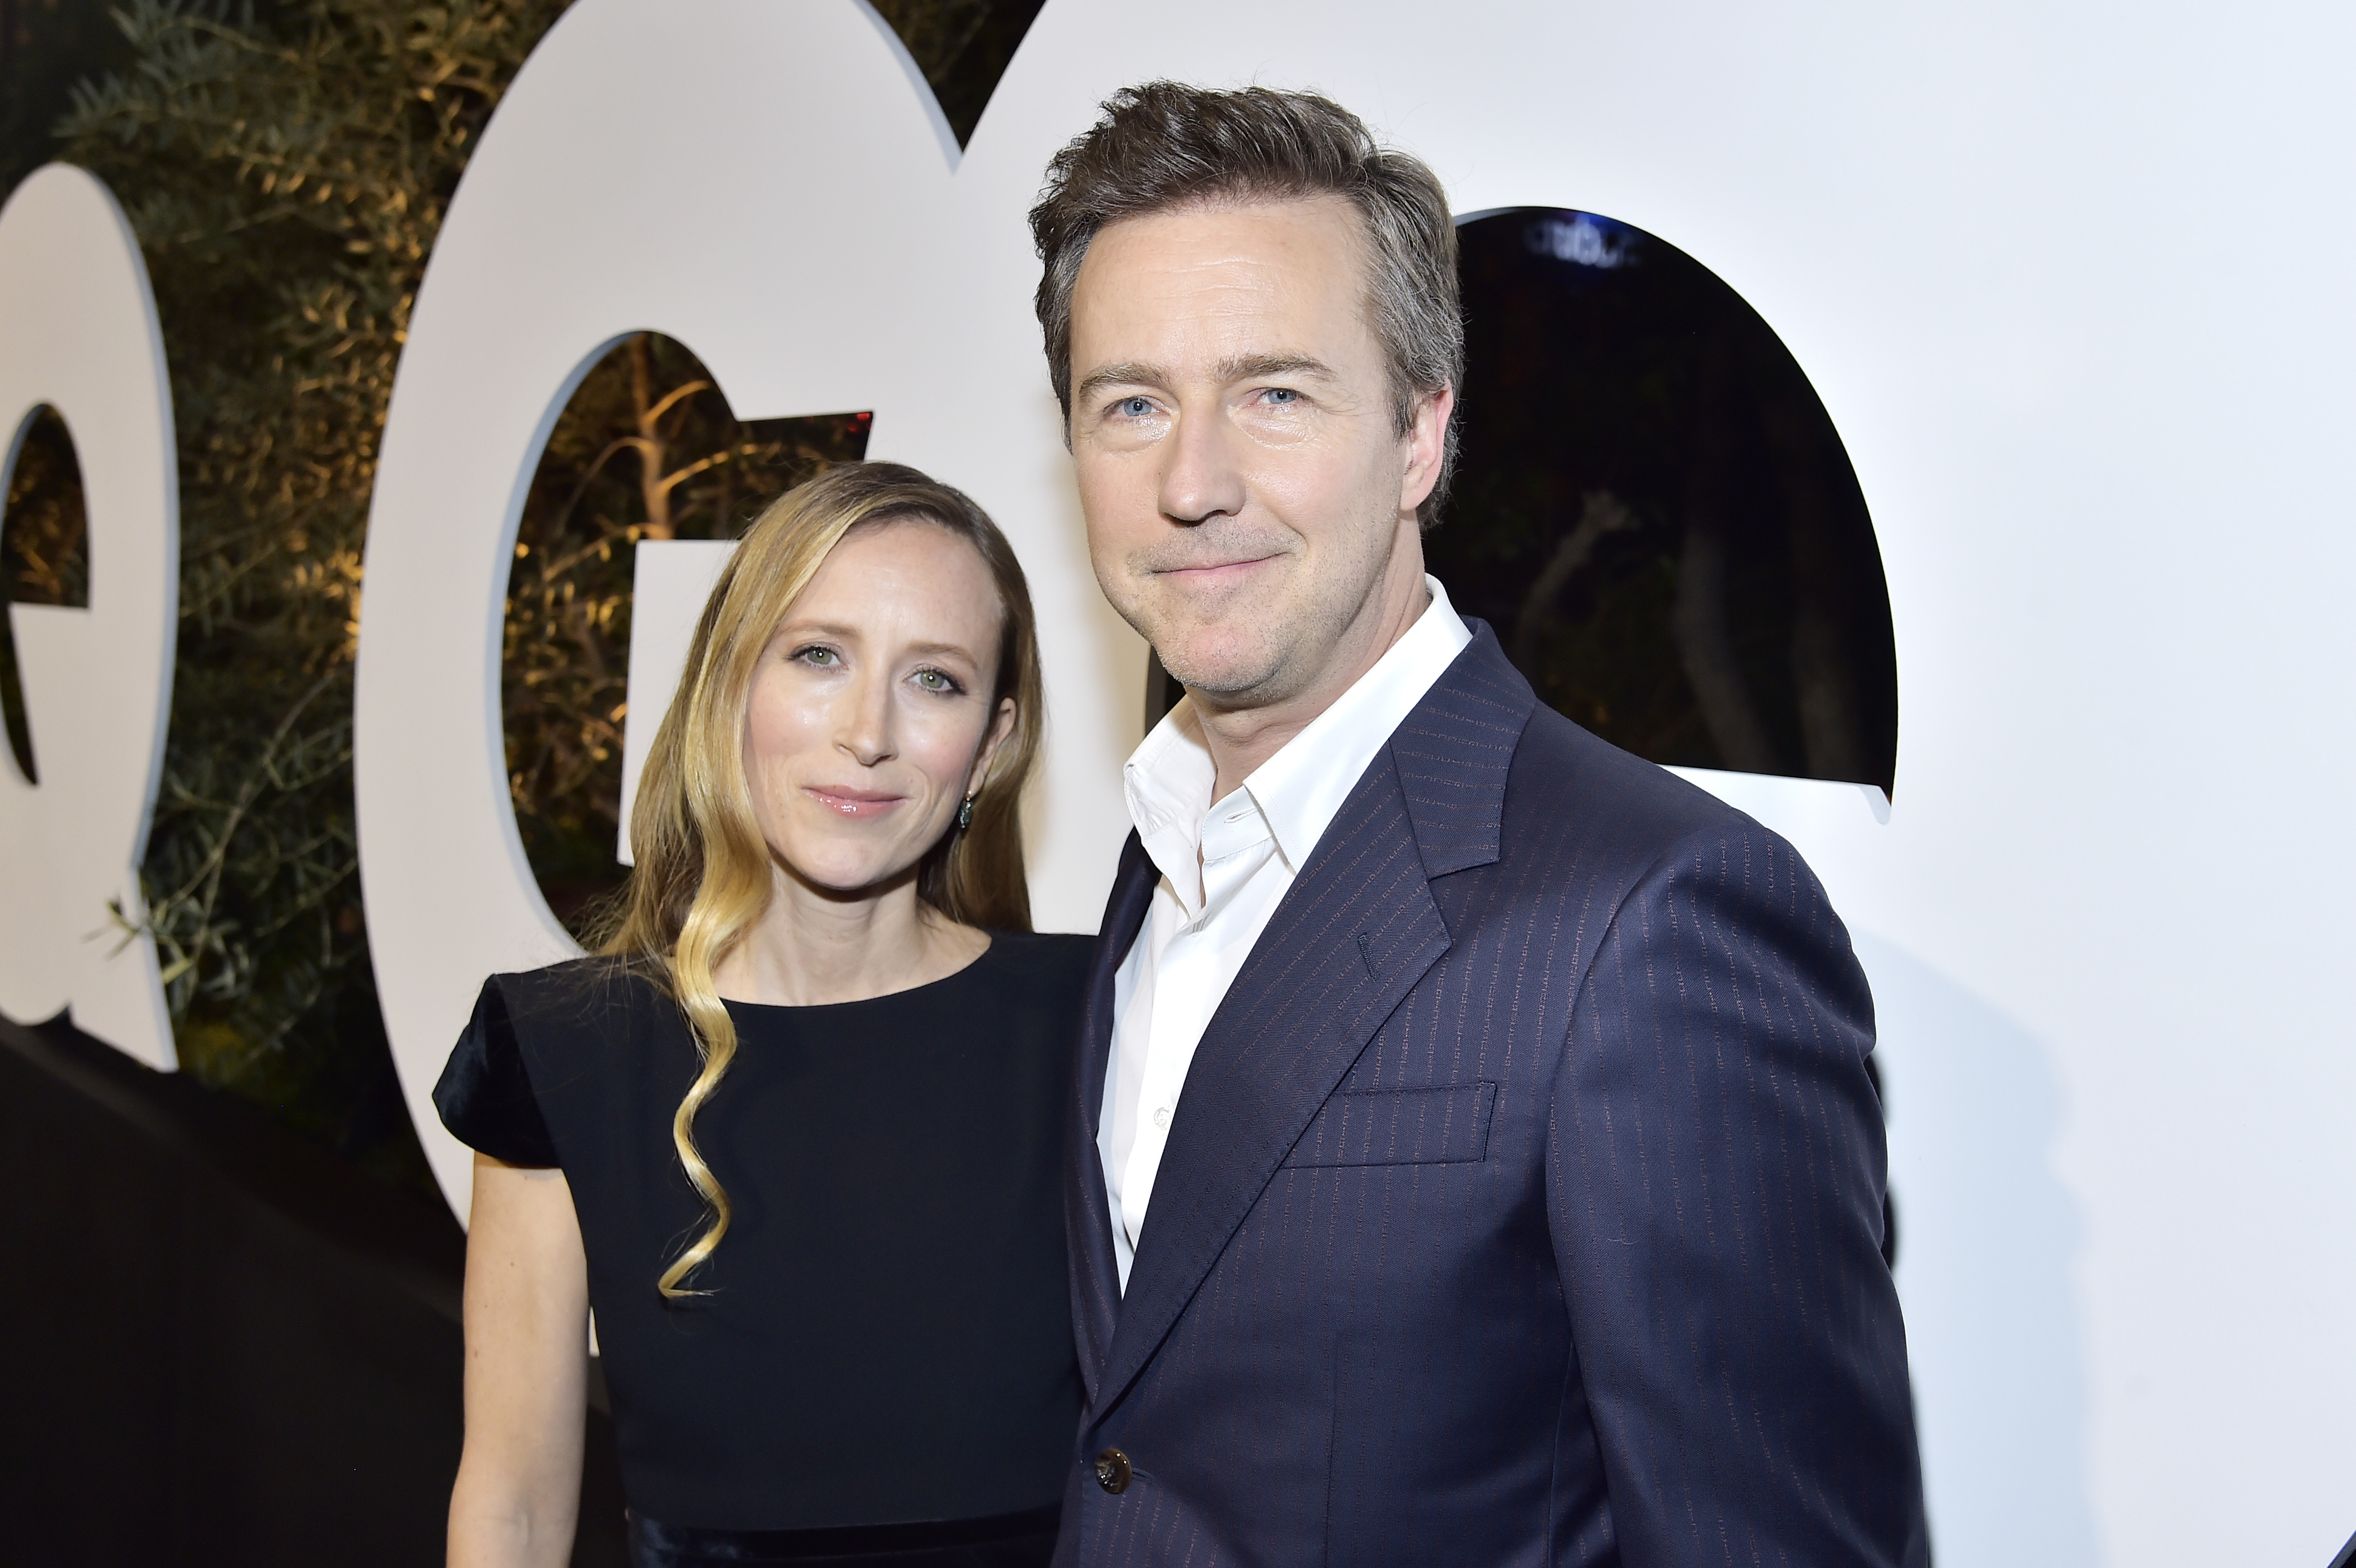 Shauna Robertson and Edward Norton at the GQ Men Of The Year Celebration in West Hollywood, California, on December 05, 2019. | Source: Getty Images